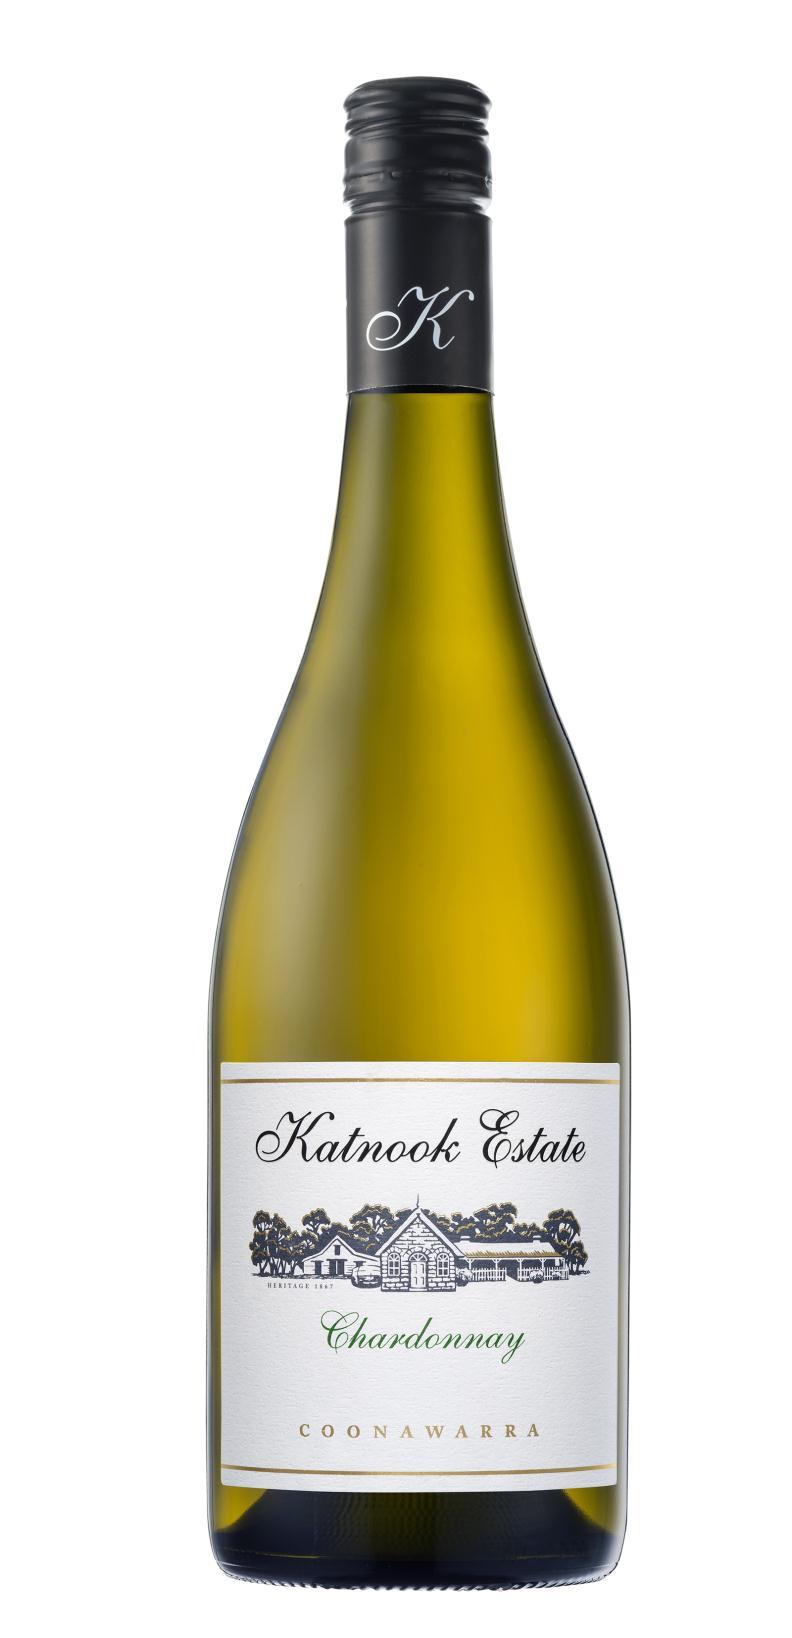 The Katnook Estate range of premium quality, single varietal wines is an expression of the classic and unique characteristics of the Coonawarra wine region.